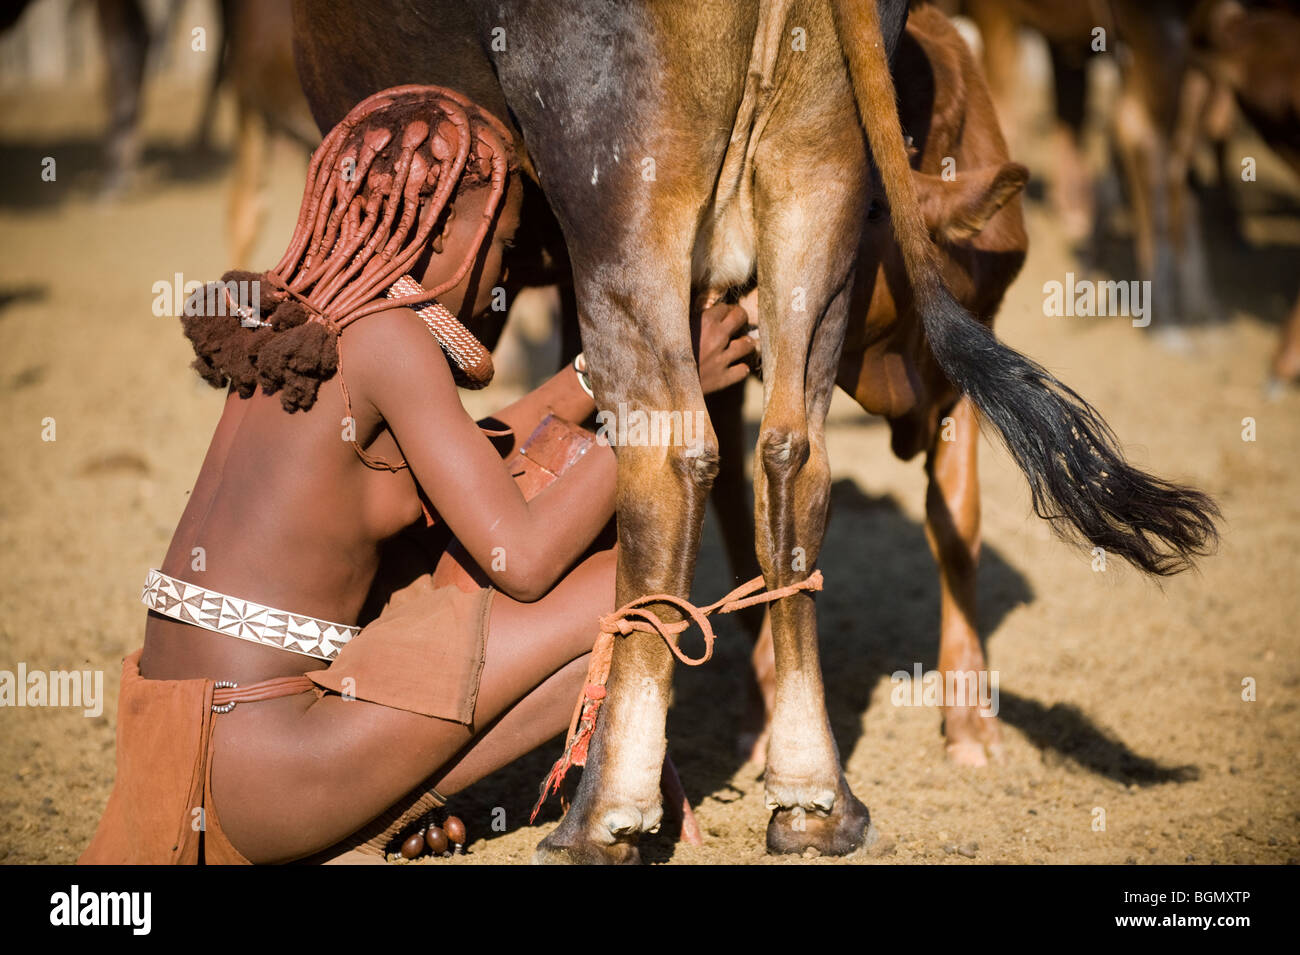 Femme Himba micro gc, Namibie Banque D'Images